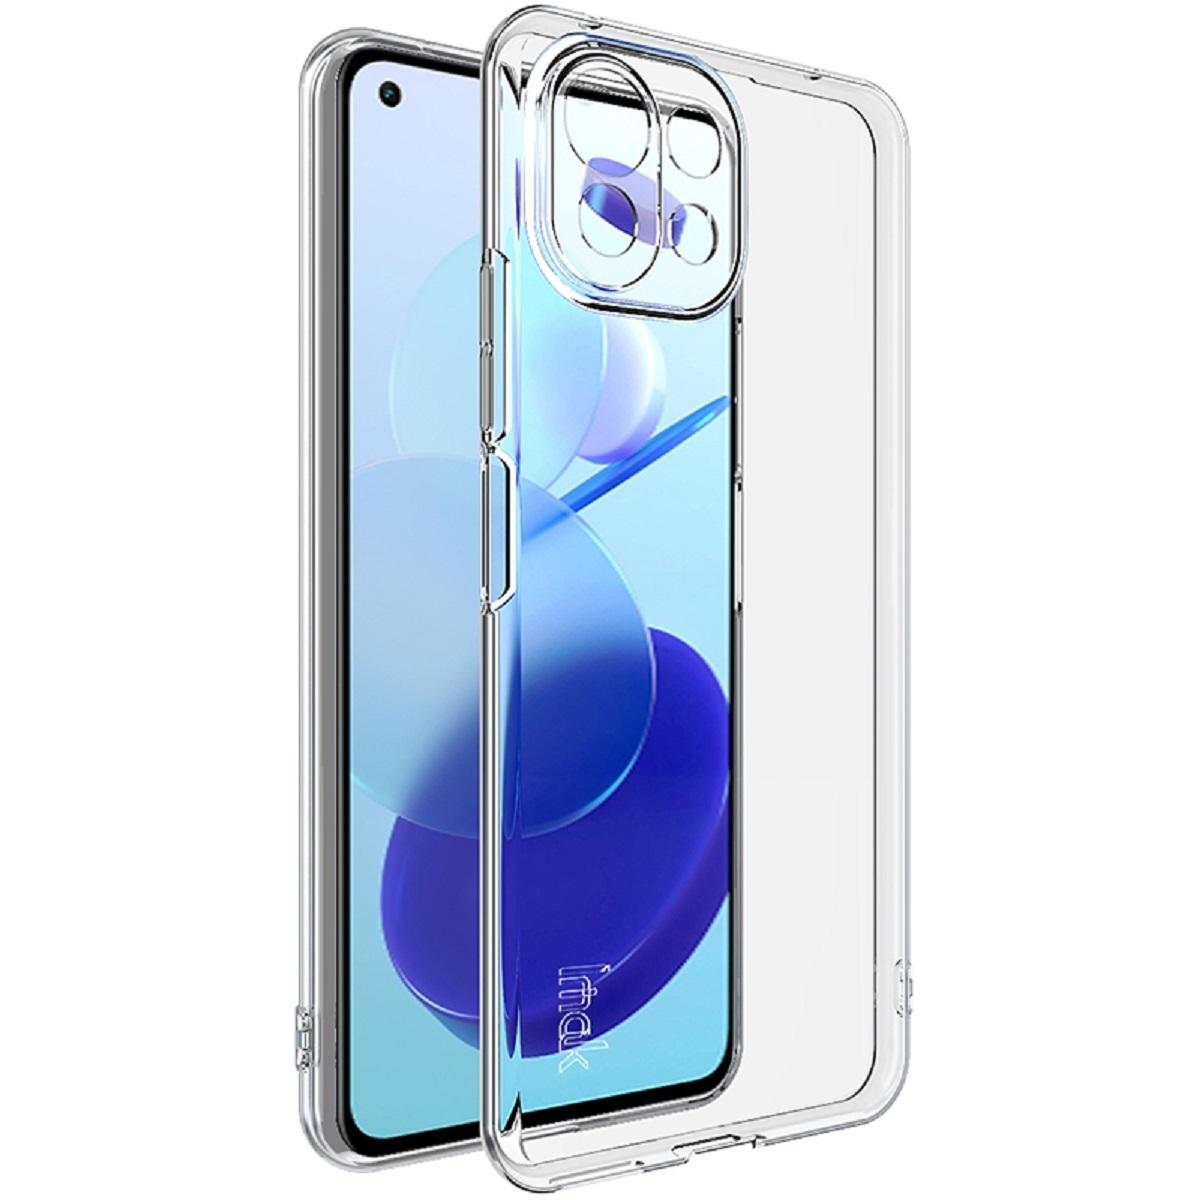 Backcover, Xiaomi, Backcover, 11 PROTECTORKING Mi Transparent Hülle, Lite,